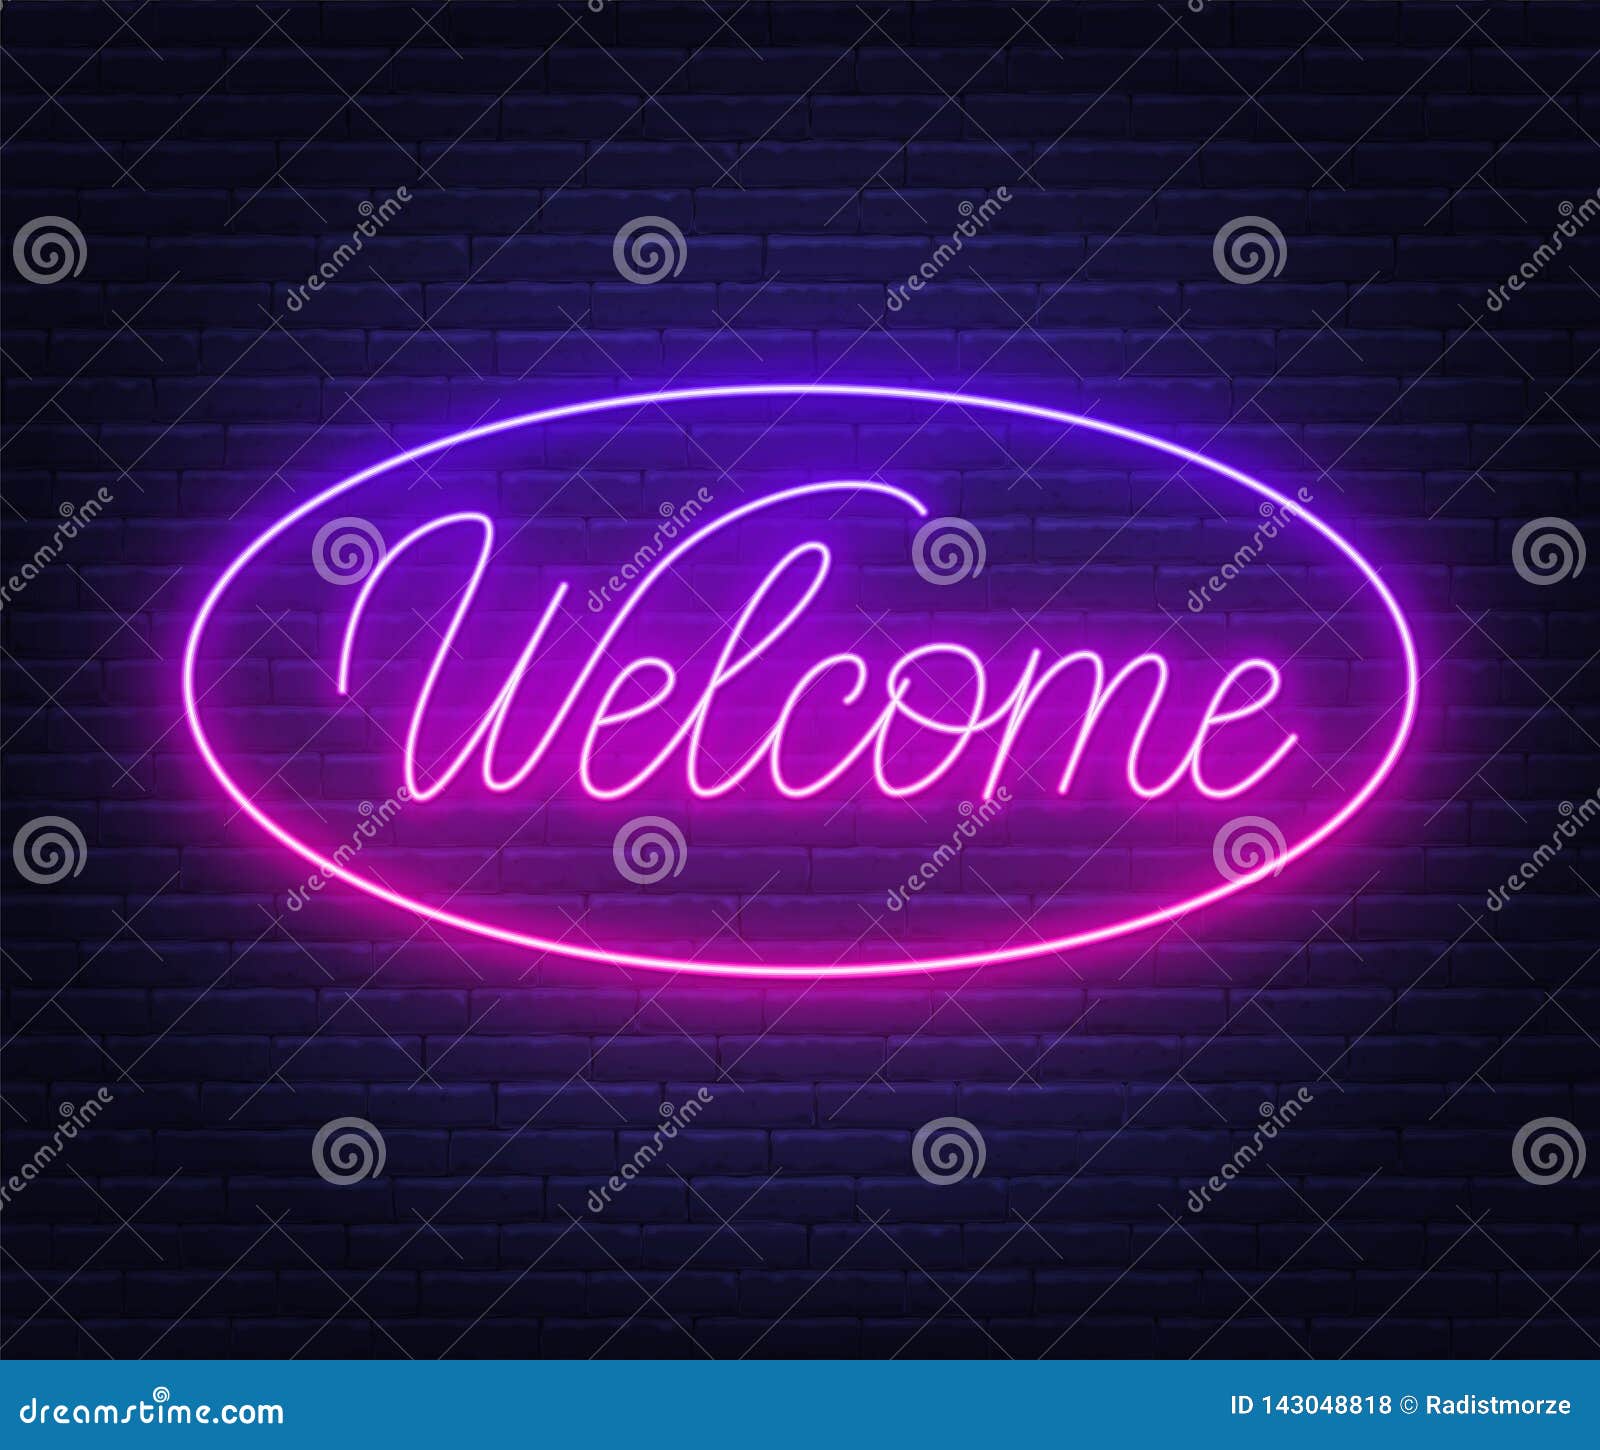 Neon Sign Welcome on on Brick Wall Background. Stock Vector ...